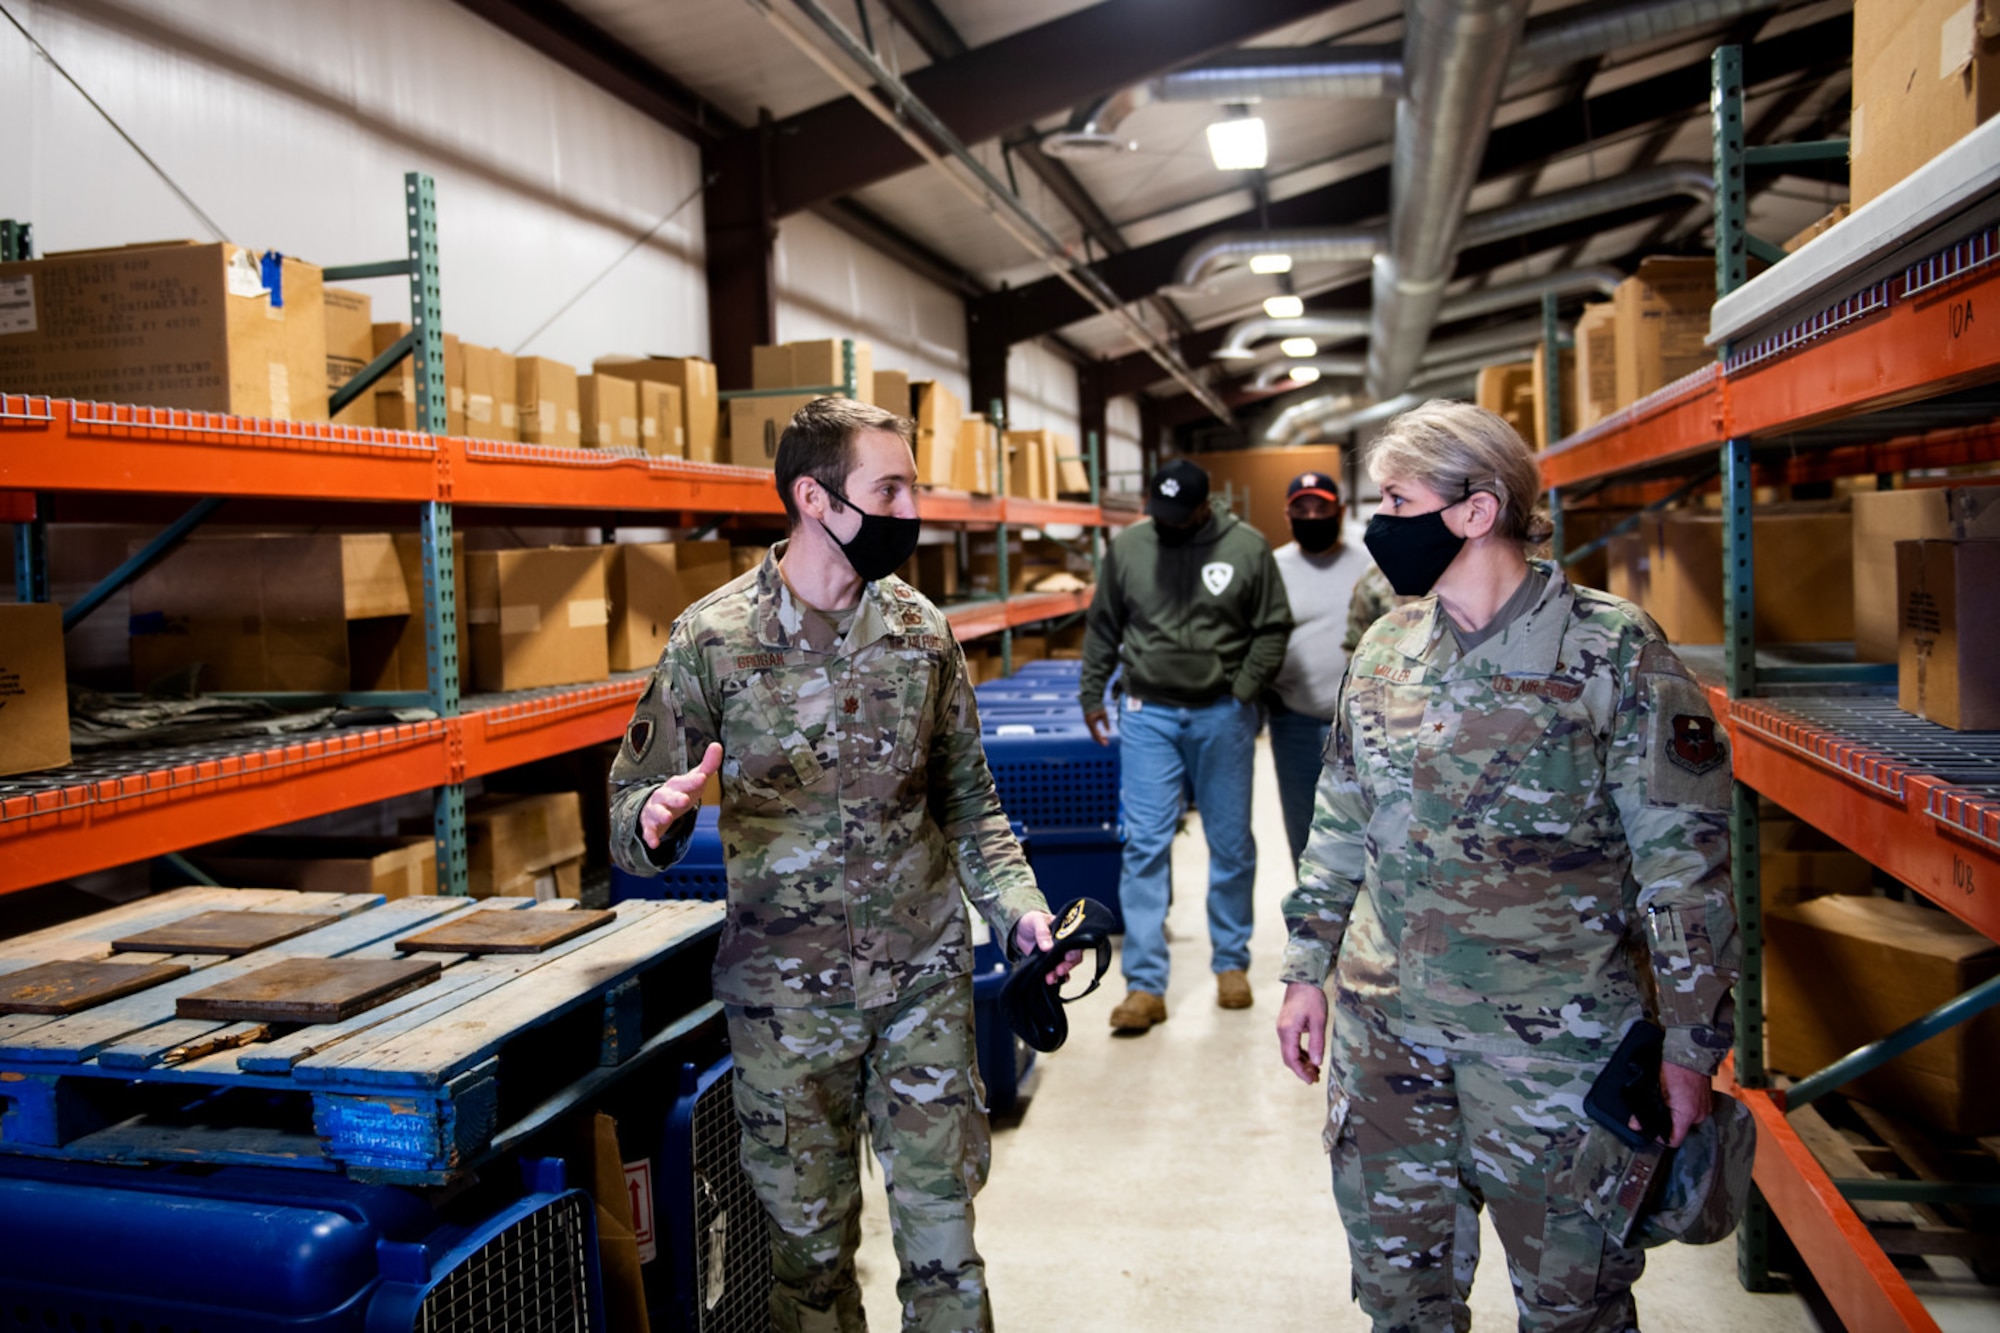 U.S. Air Force Brig. Gen. Caroline Miller (right), 502nd Air Base Wing and Joint Base San Antonio commander, receives a tour from Maj. Tate Grogan (left), 341st Training Squadron director of operations, of where K-9 were stored during the cold weather Feb. 19, 2021, at Joint Base San Antonio, Texas.